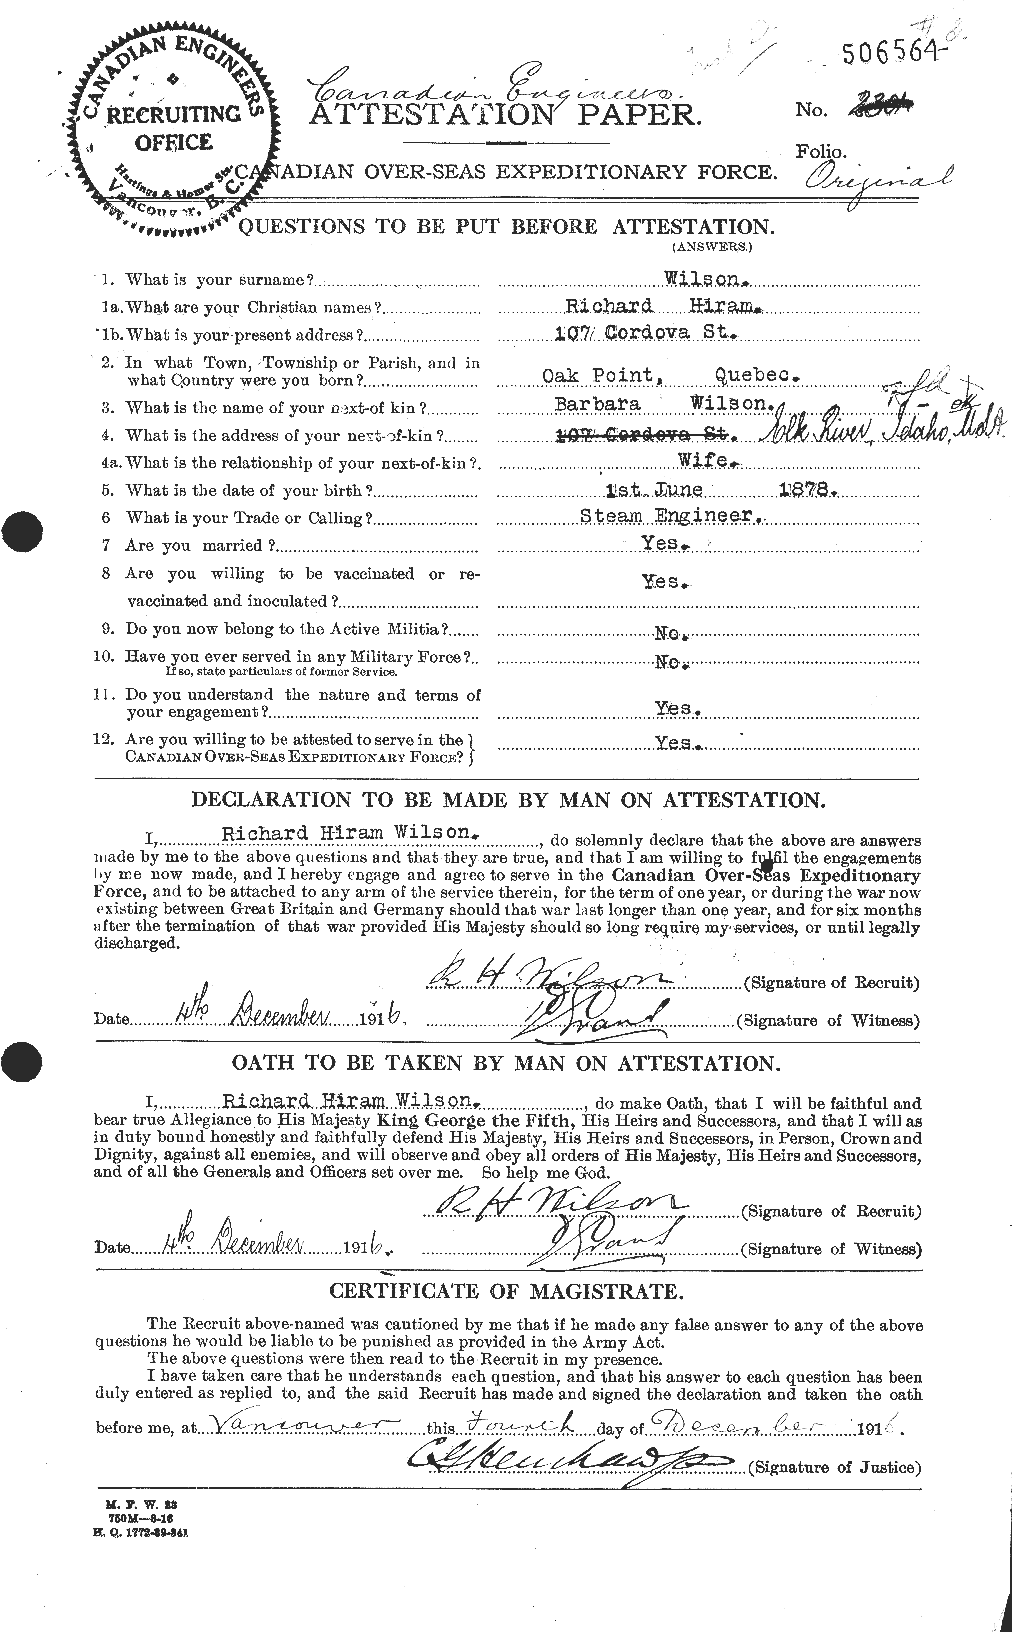 Personnel Records of the First World War - CEF 678855a